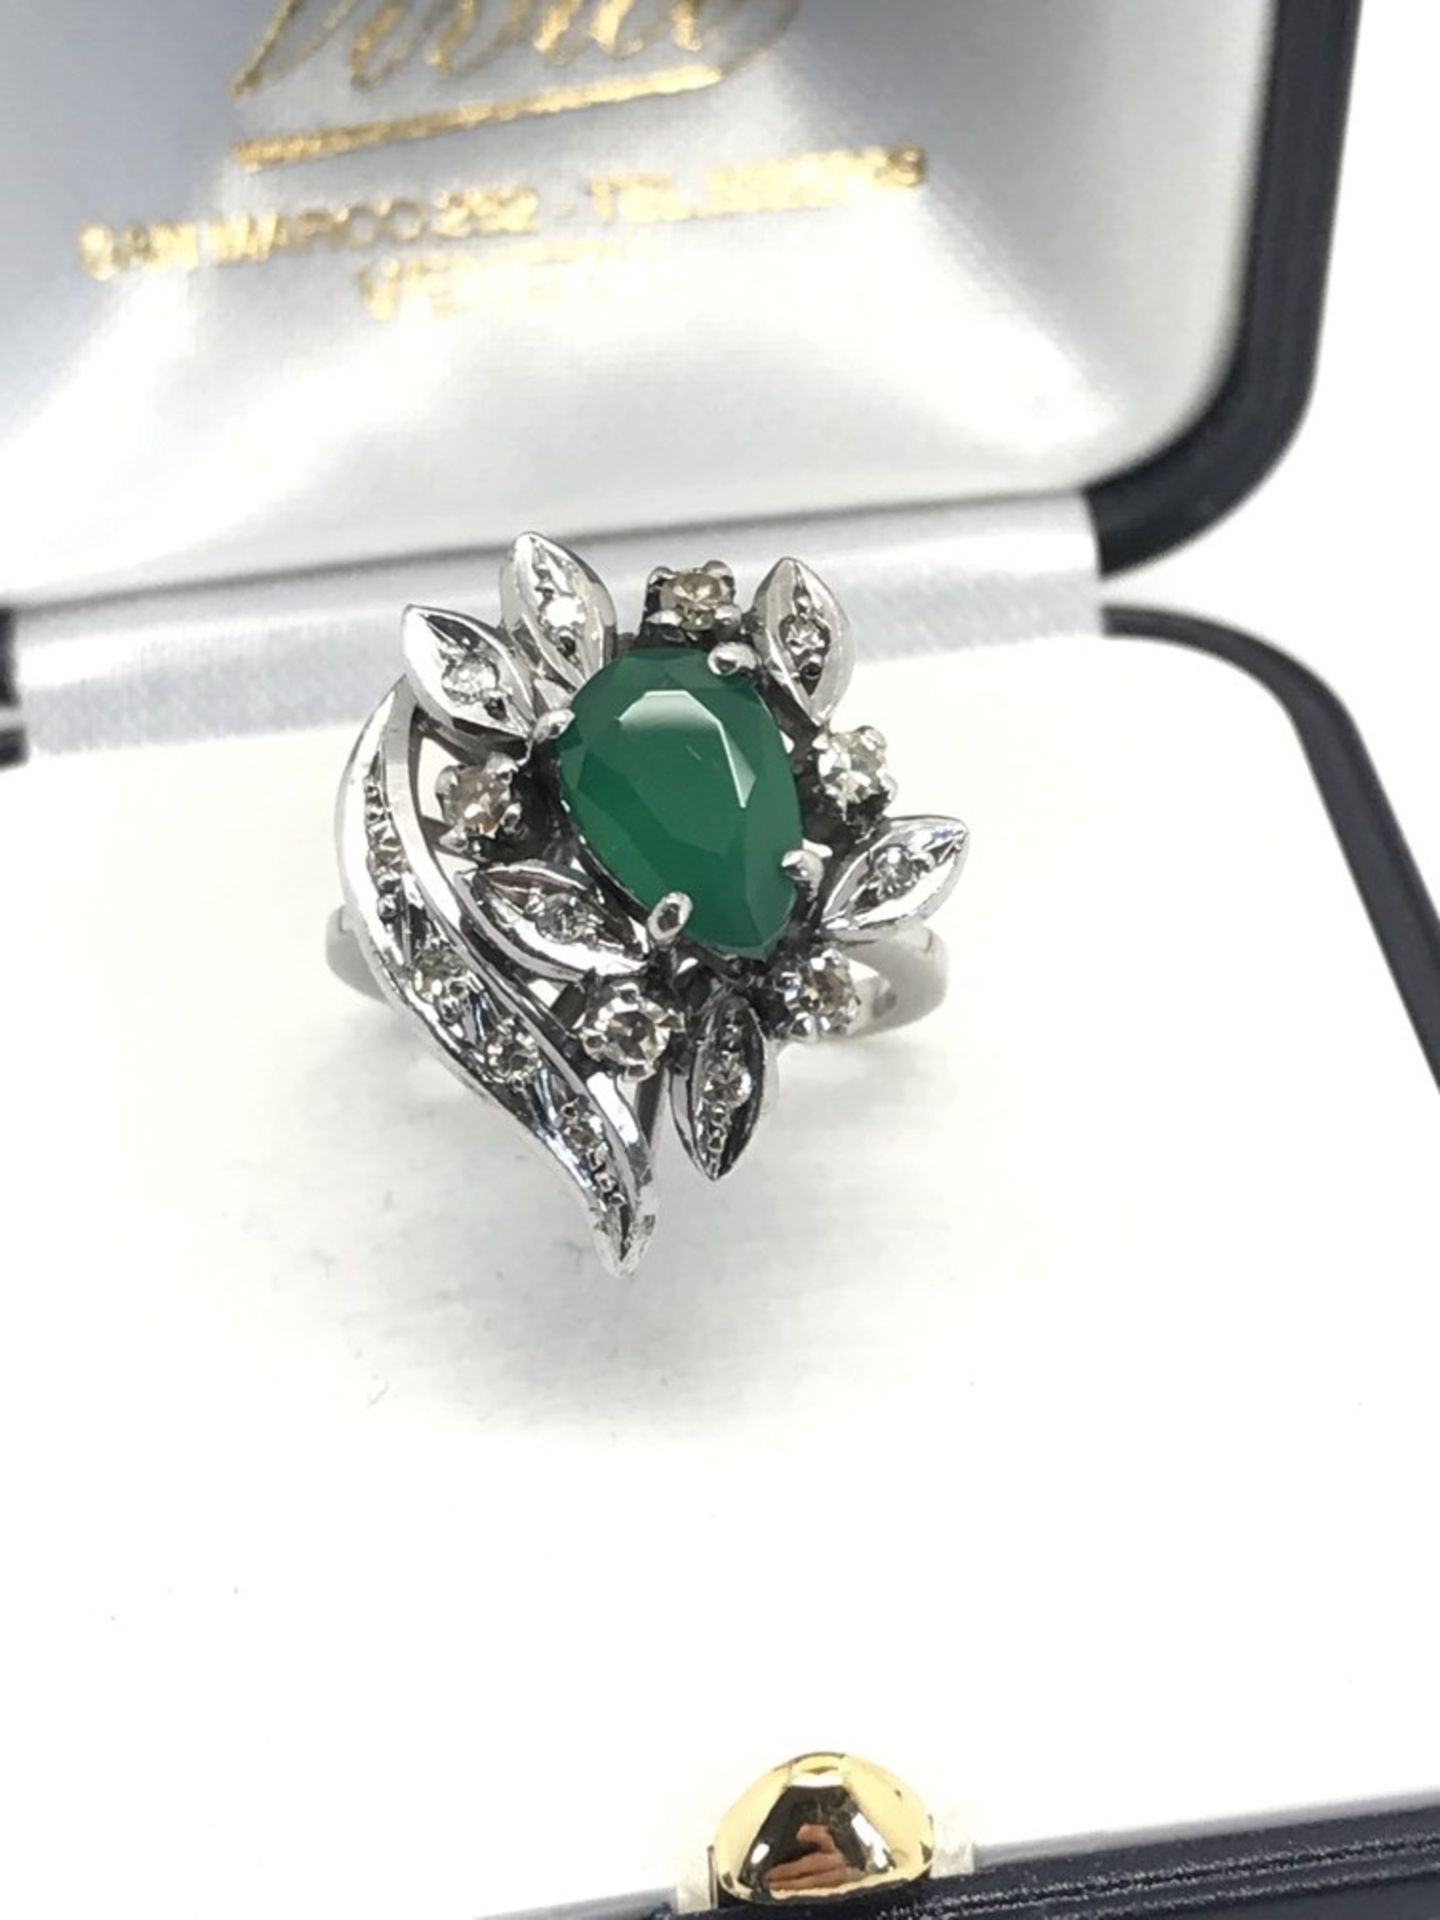 BEAUTIFUL DIAMOND SPRAY CLUSTER RING SET WITH GREEN STONE IN WHITE METAL TESTED AS 14ct GOLD - Image 2 of 2